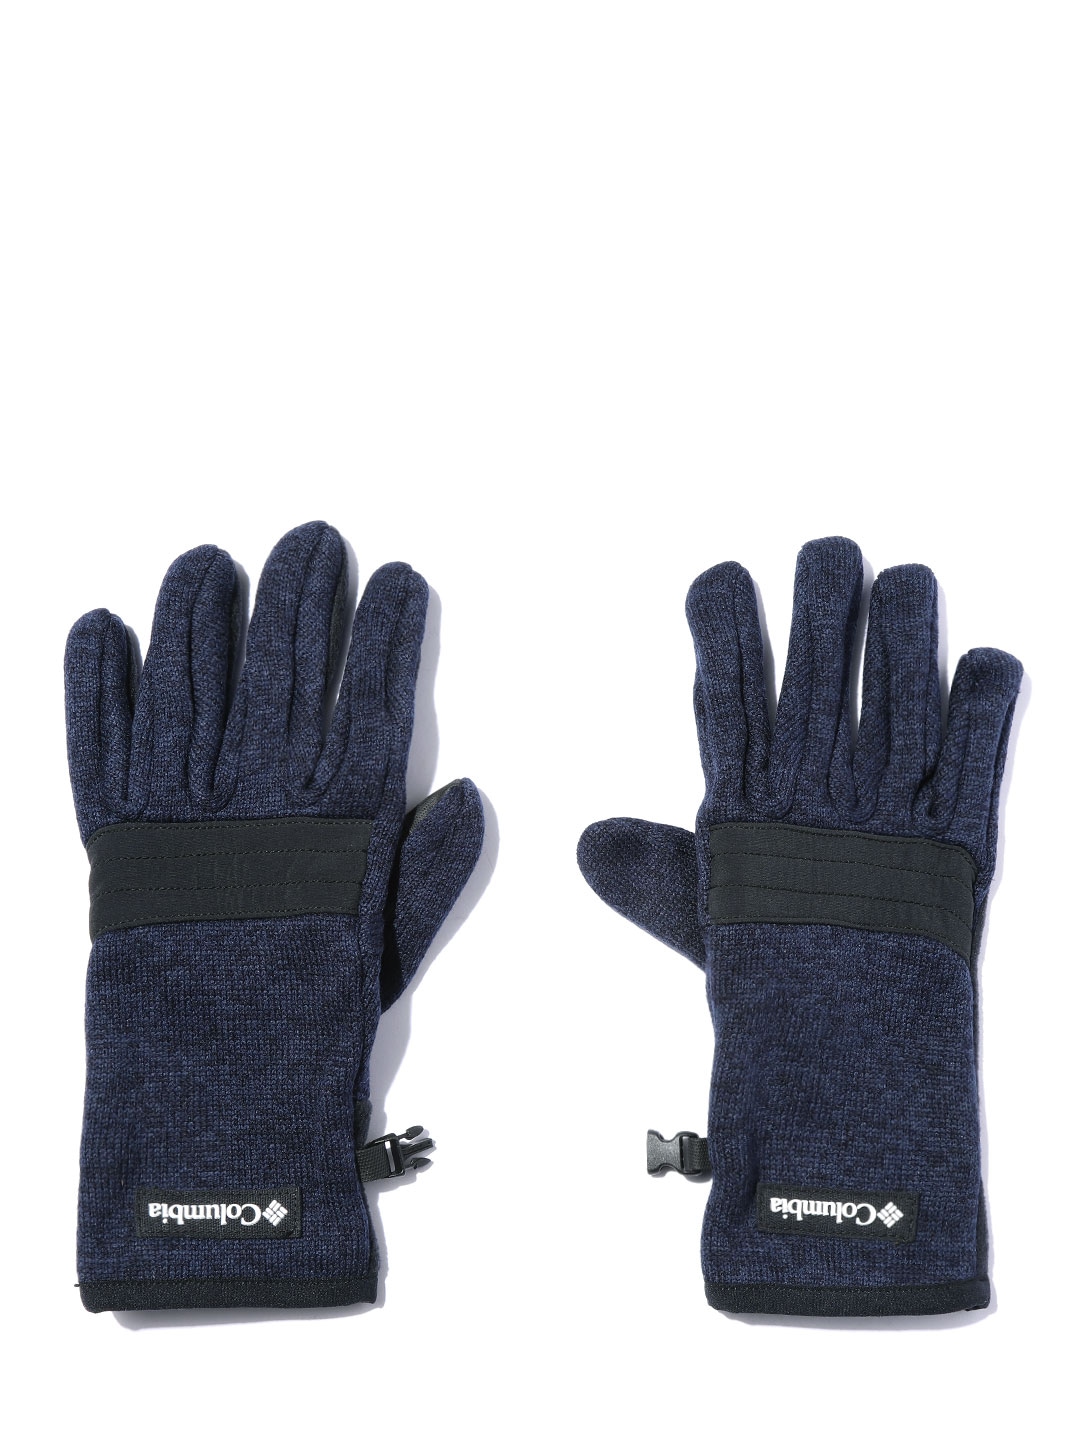 

Columbia Men Sweater Weather Hand Gloves, Blue